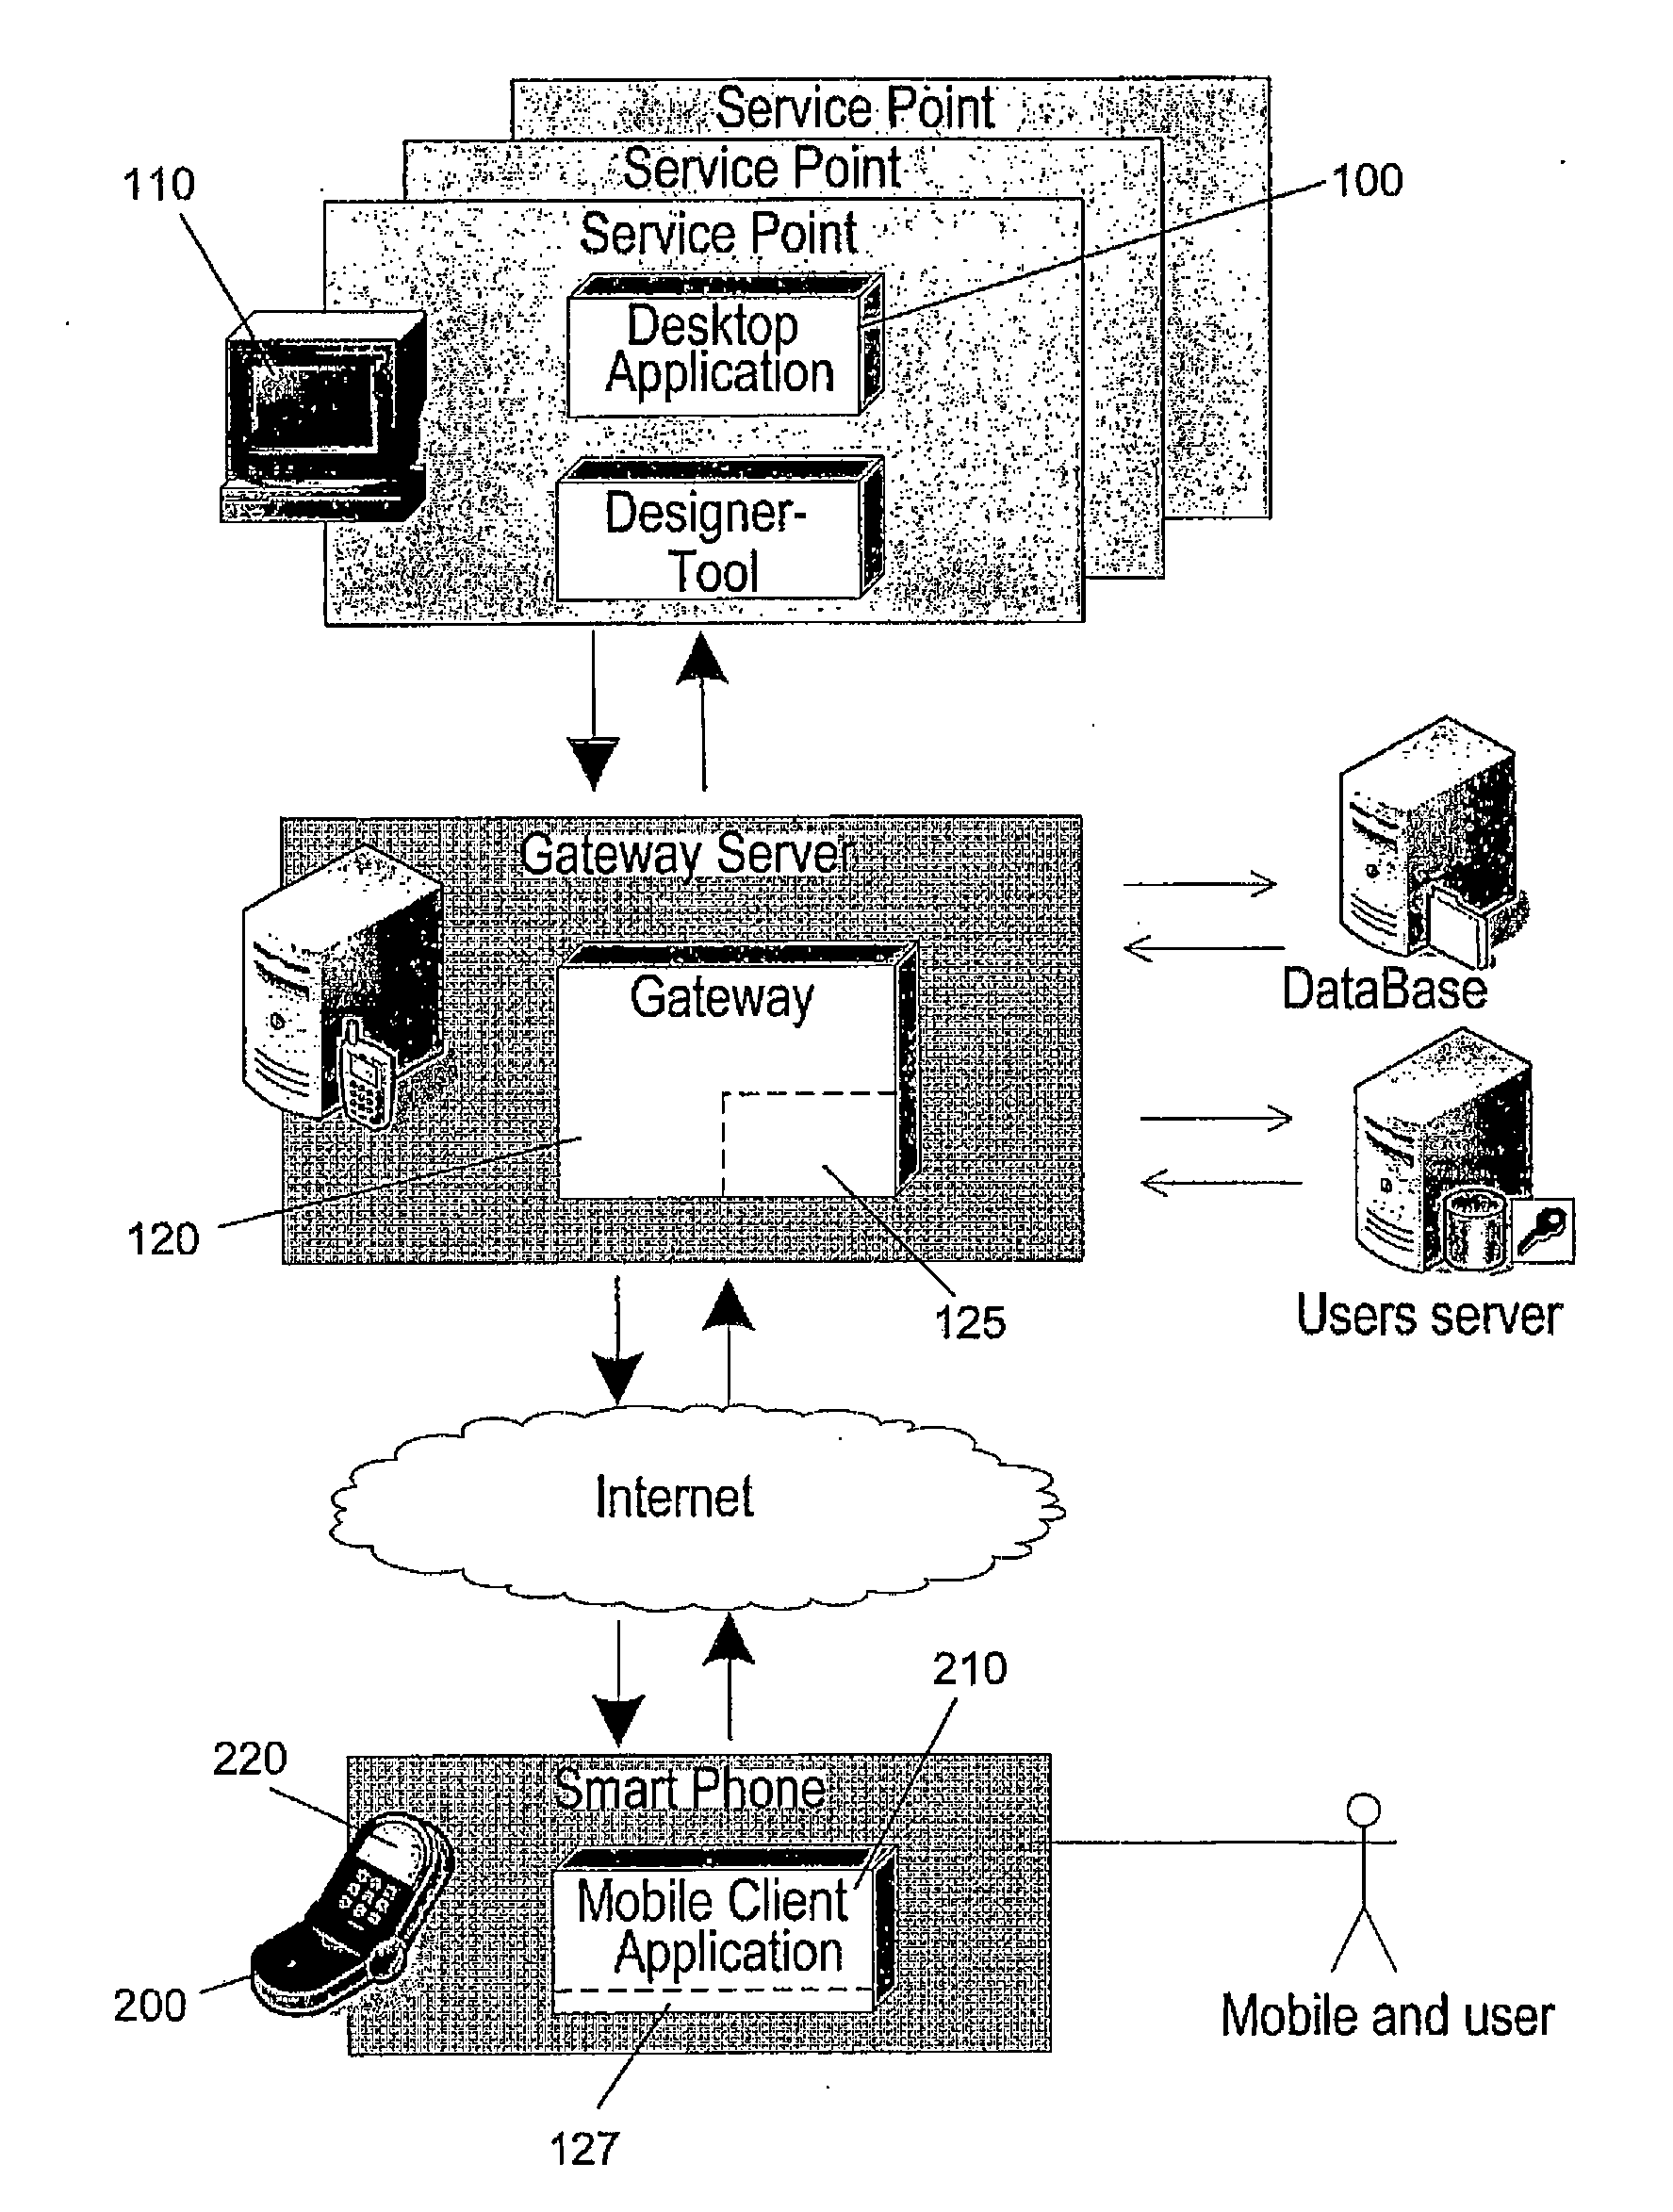 Method and system for emulating desktop software applications in a mobile communication network